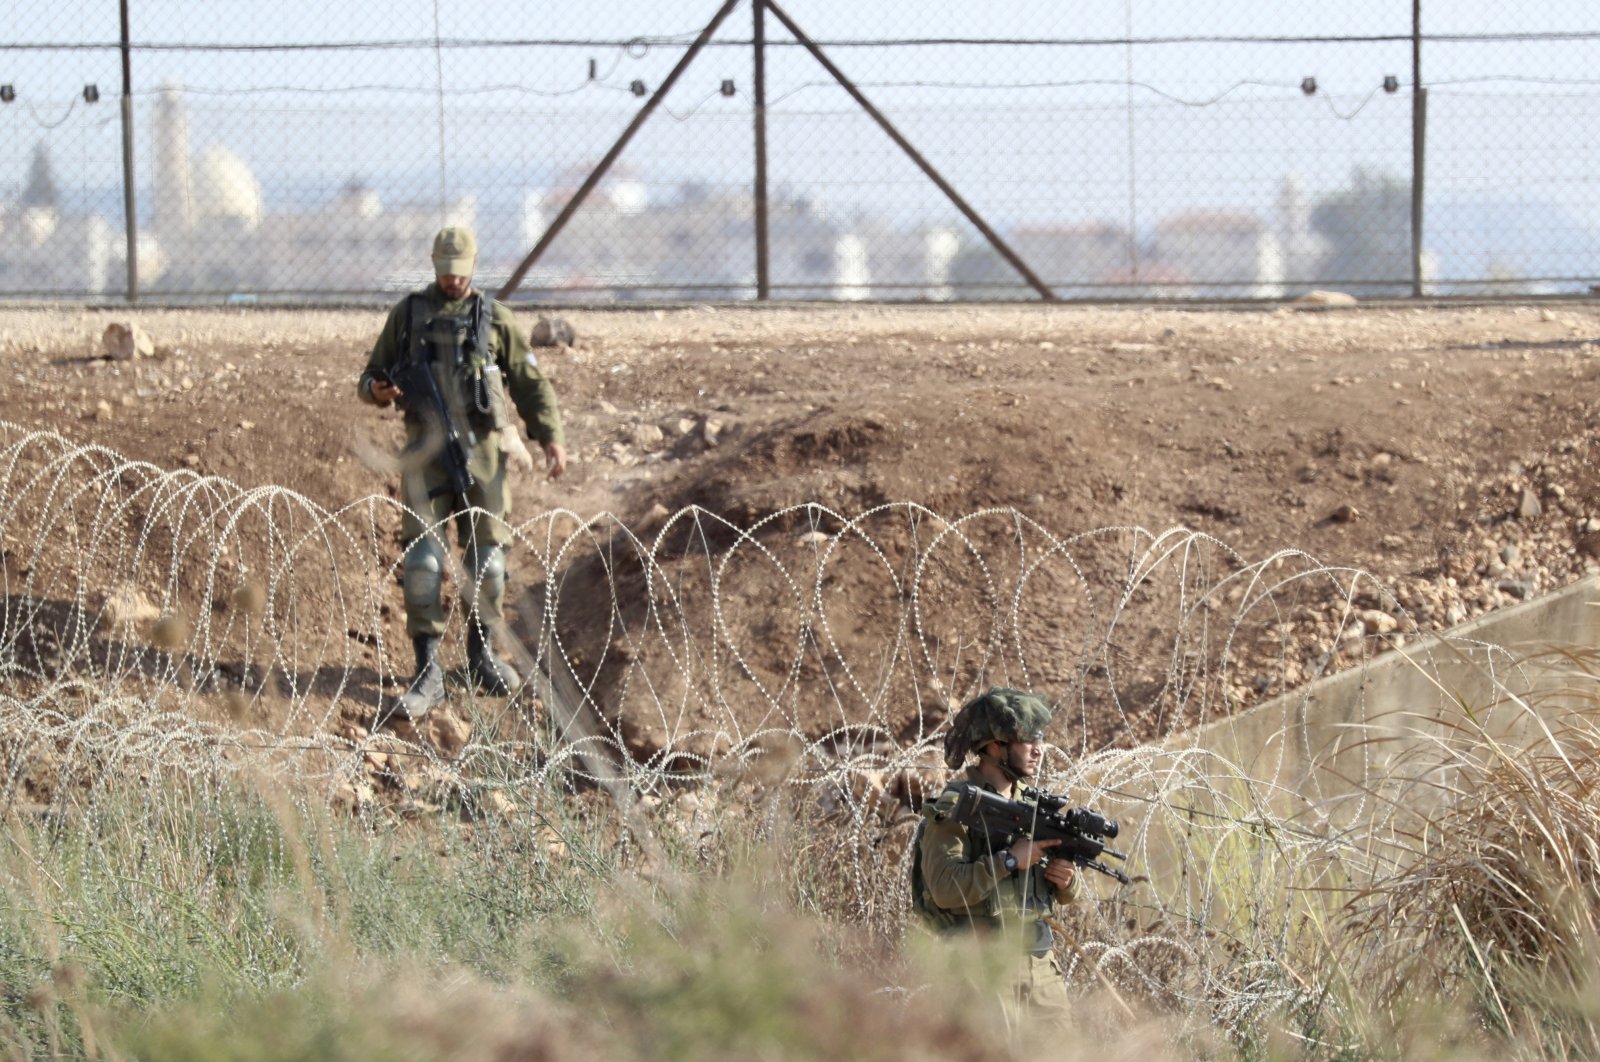 Israeli soldiers take positions along the border as they search for two Palestinians who broke out of a maximum-security prison last week, on a road leading to the West Bank town of Jenin, near Gan Ner, Israel, Sept. 12, 2021. (AP Photo)